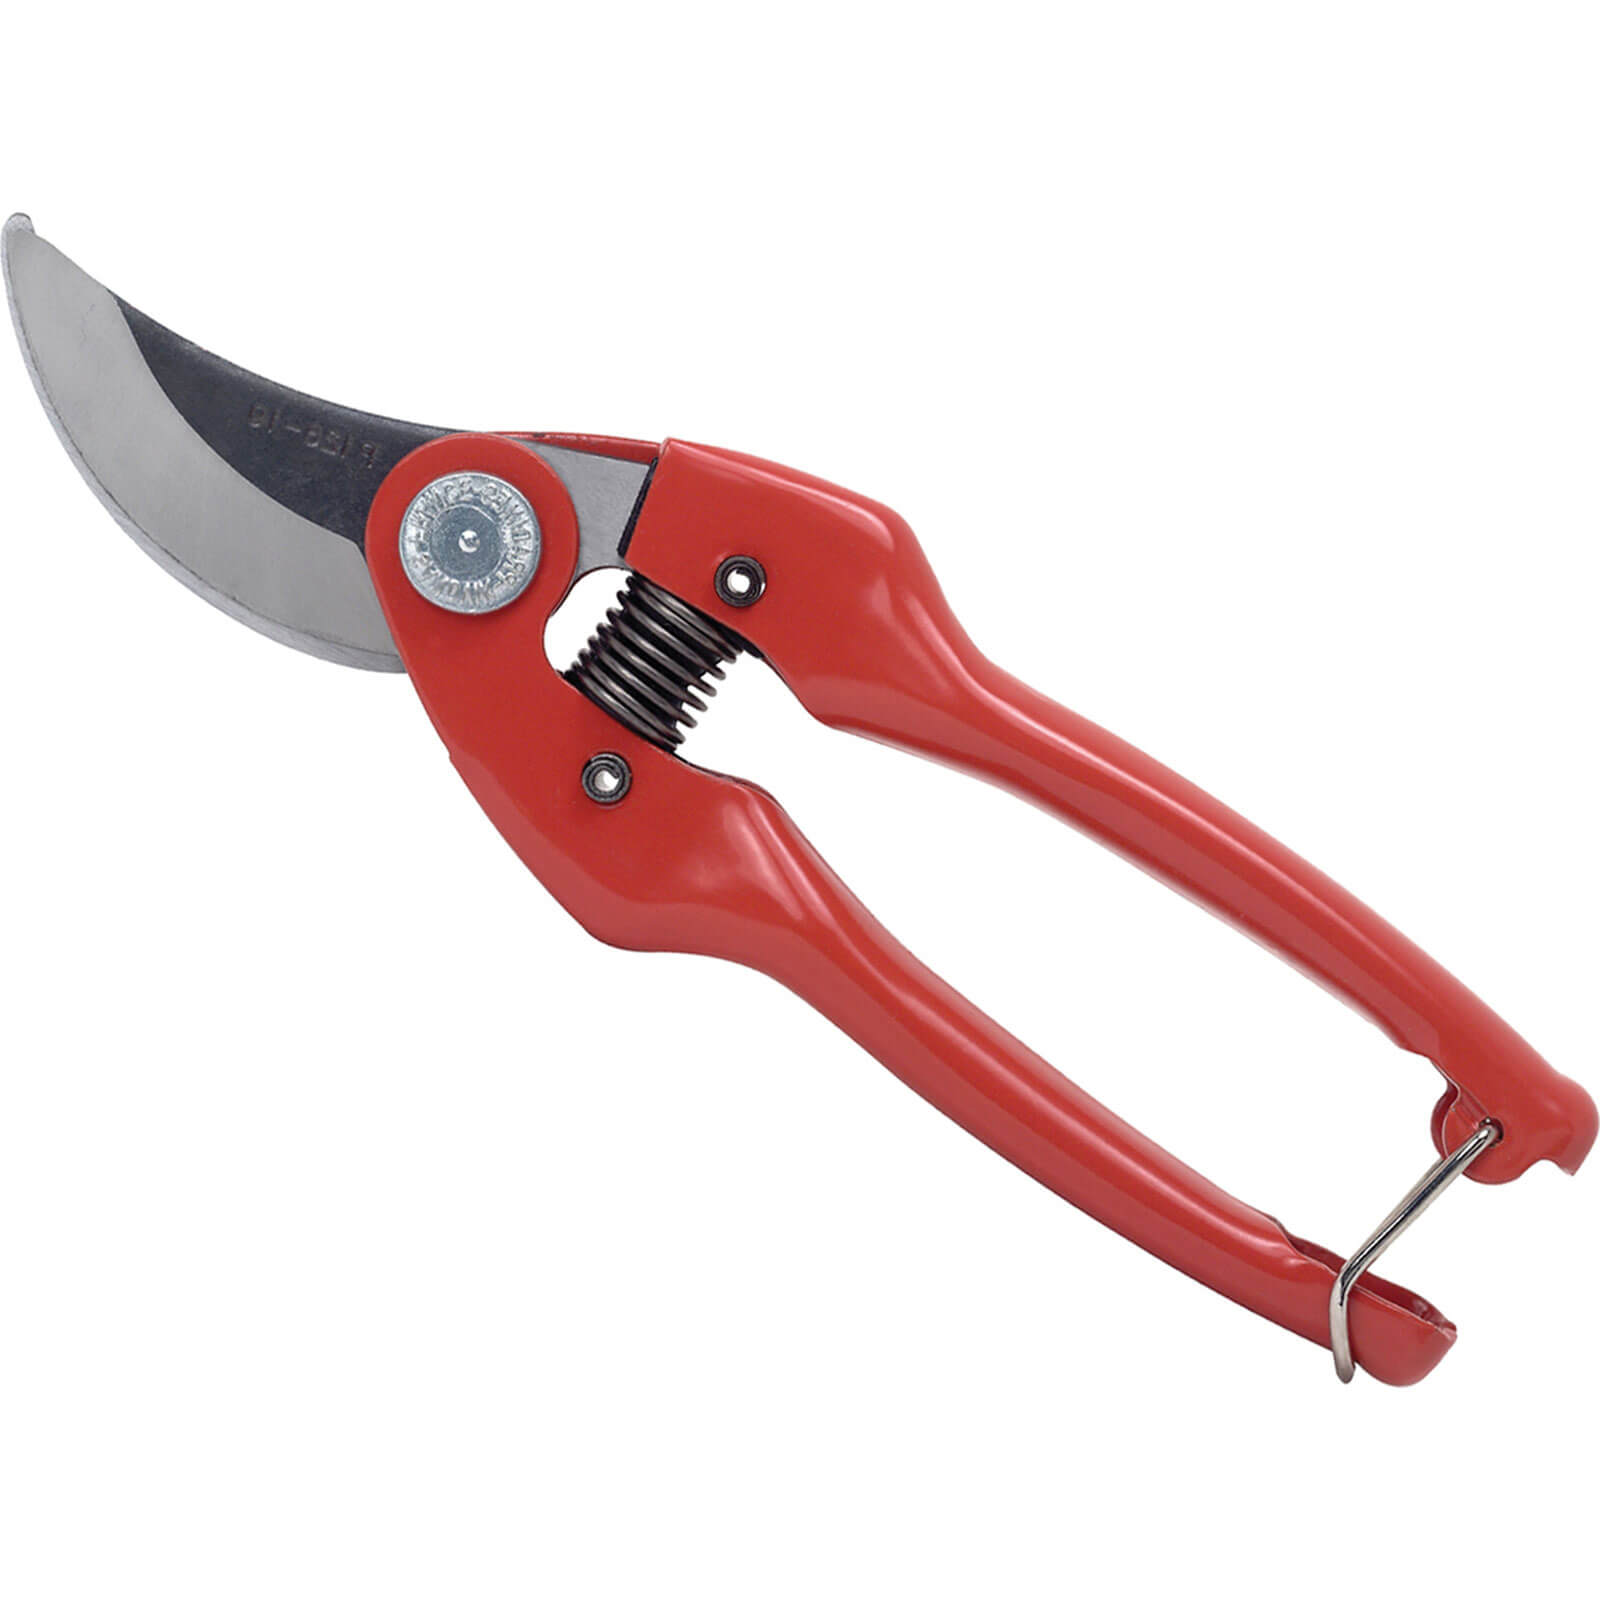 Bahco Professional Bypass Secateurs Max Cut 20mm